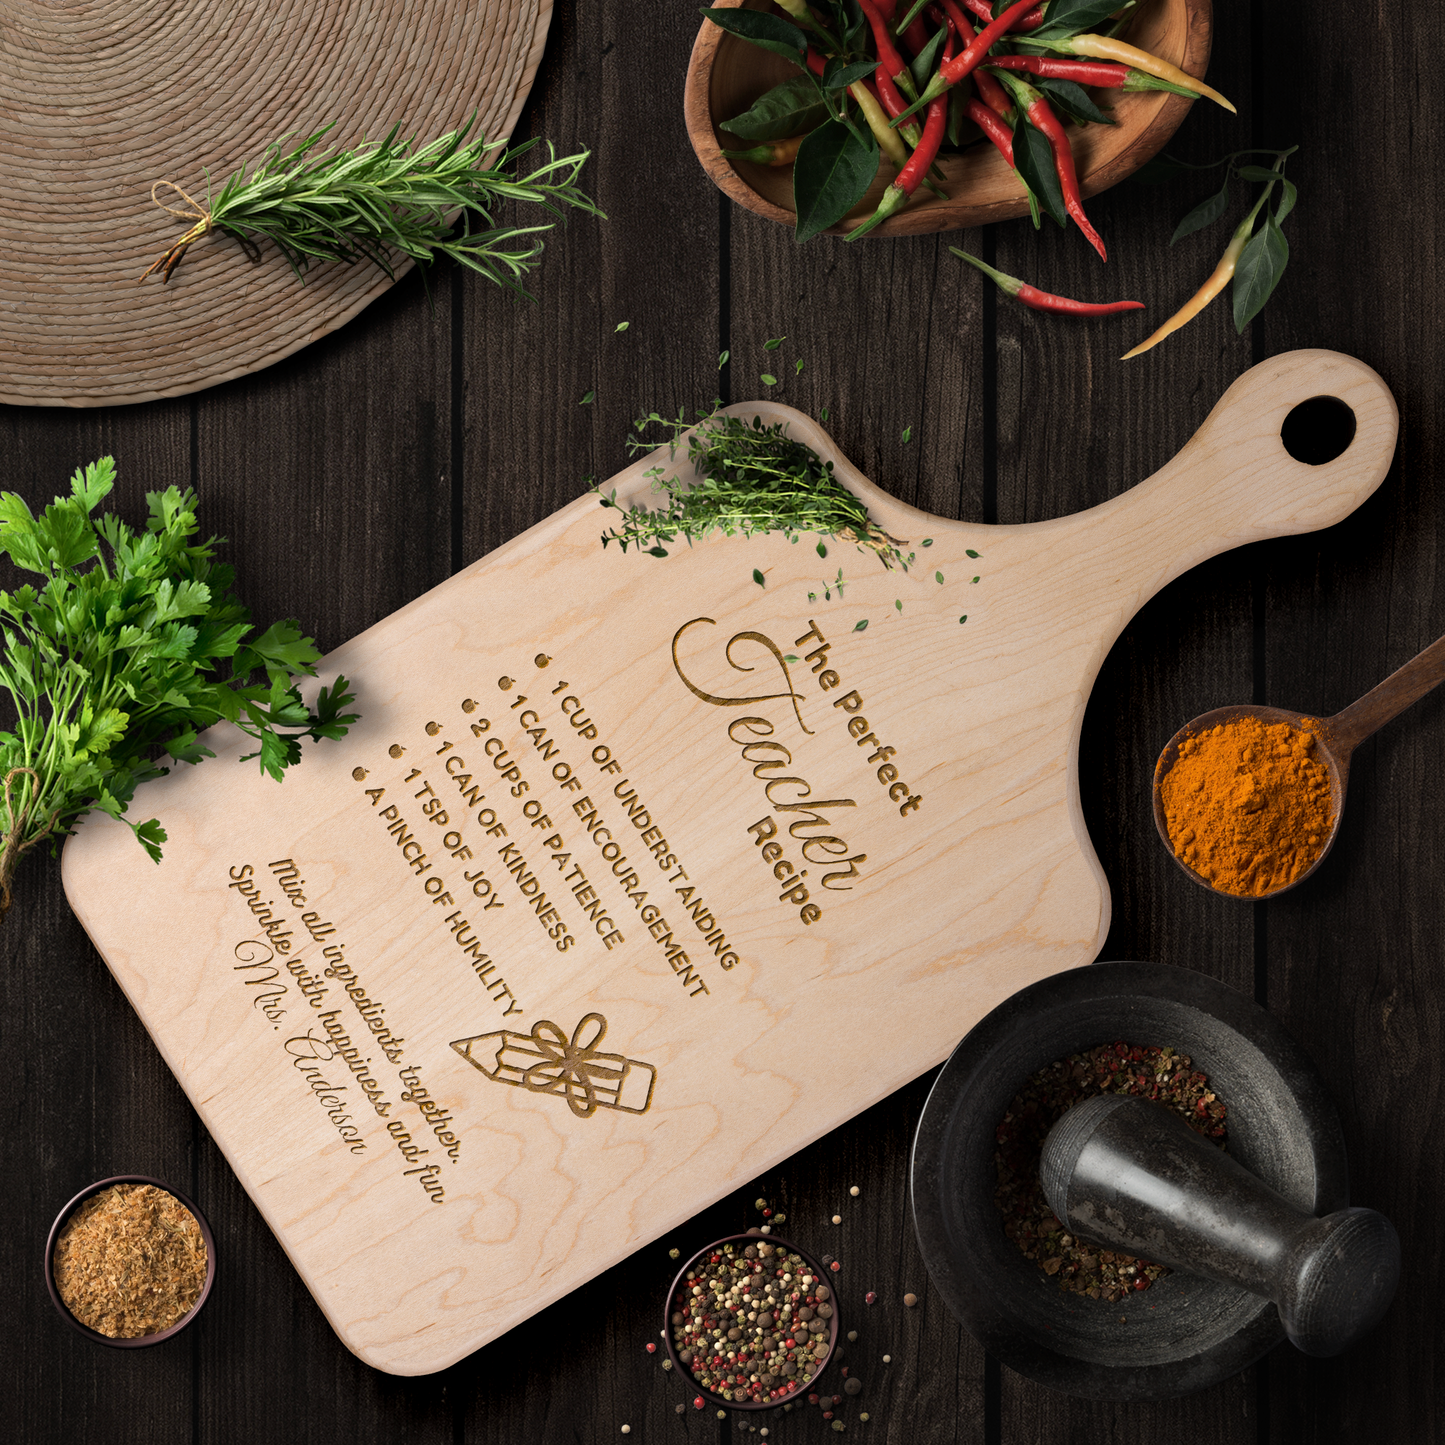 Get trendy with The Perfect Teacher Recipe Hardwood Paddle Cutting Board -  available at Good Gift Company. Grab yours for $22.50 today!